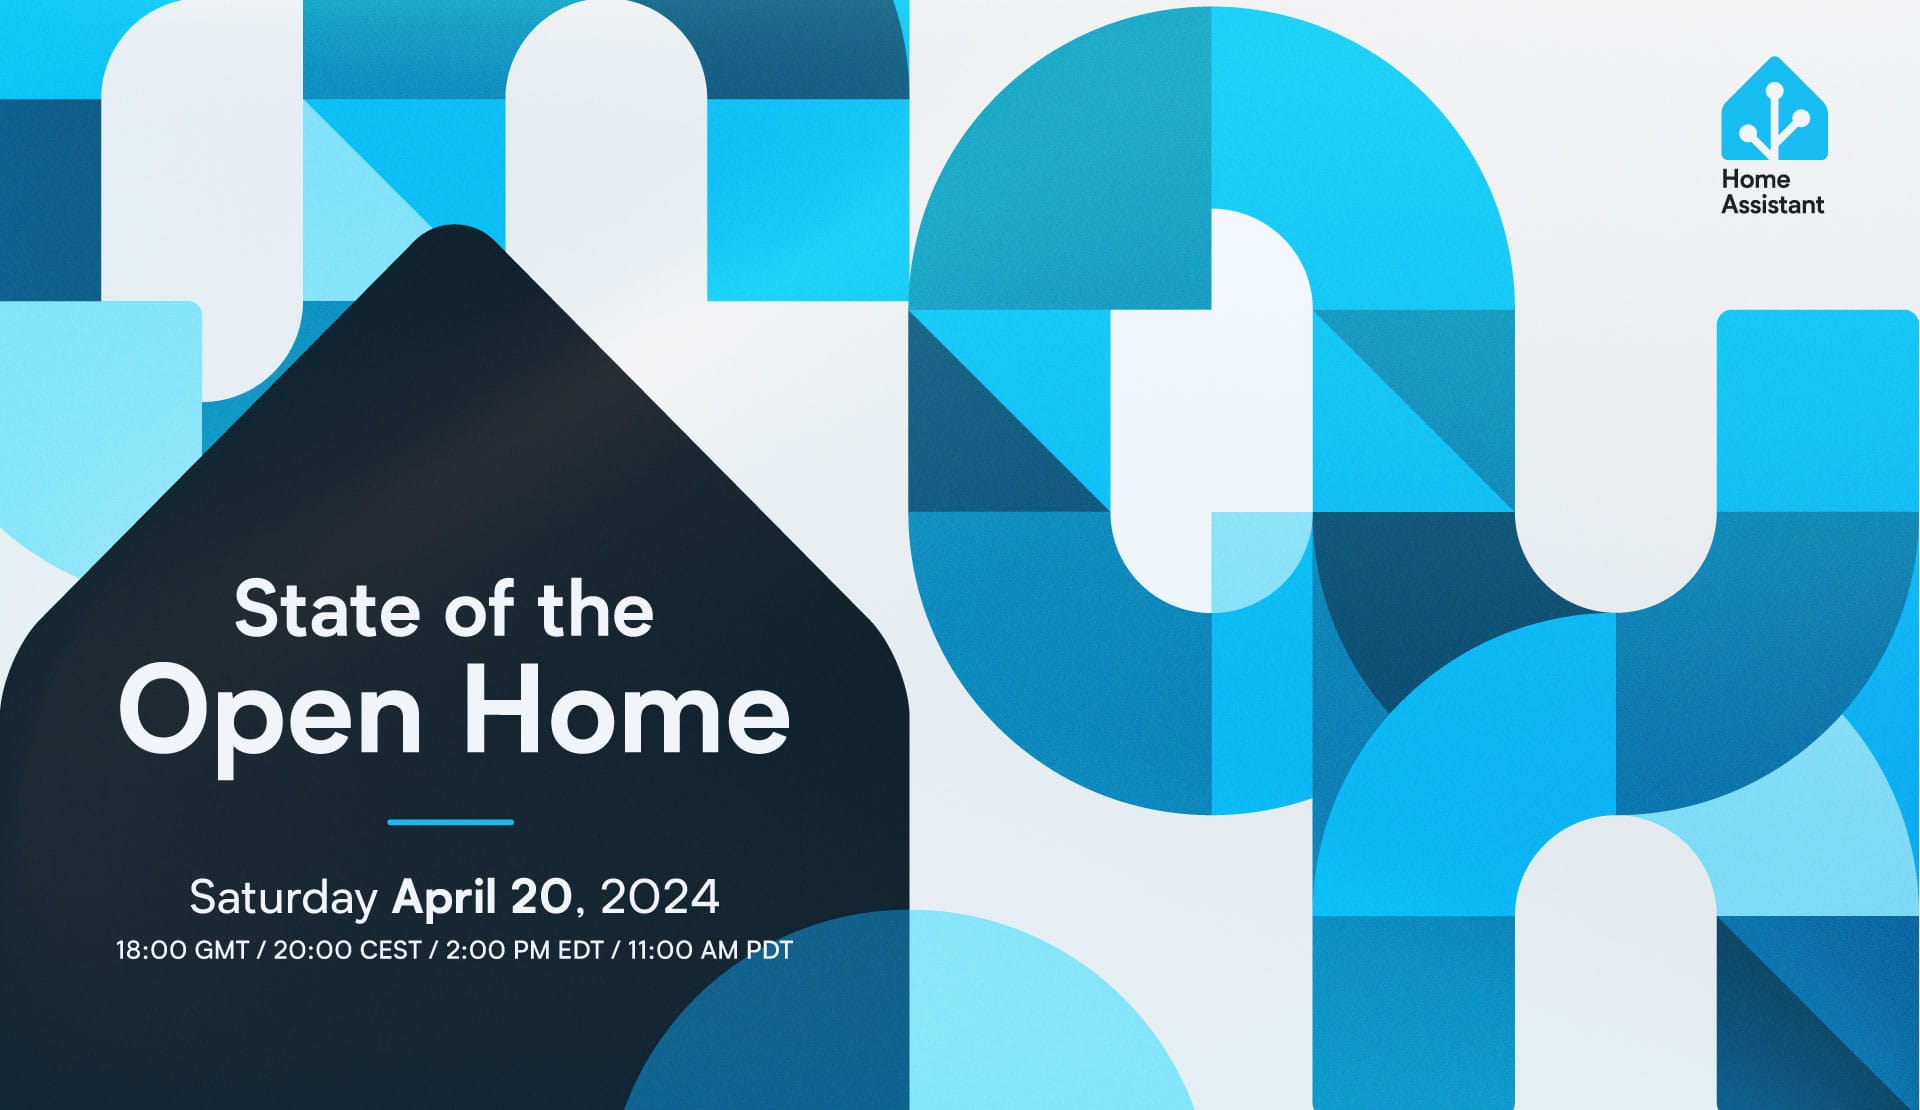 State of the Open Home livestream will be held on Saturday April 20, 2024. 18:00 GMT / 20:00 CEST / 2:00 PM EDT / 11:00 AM PDT